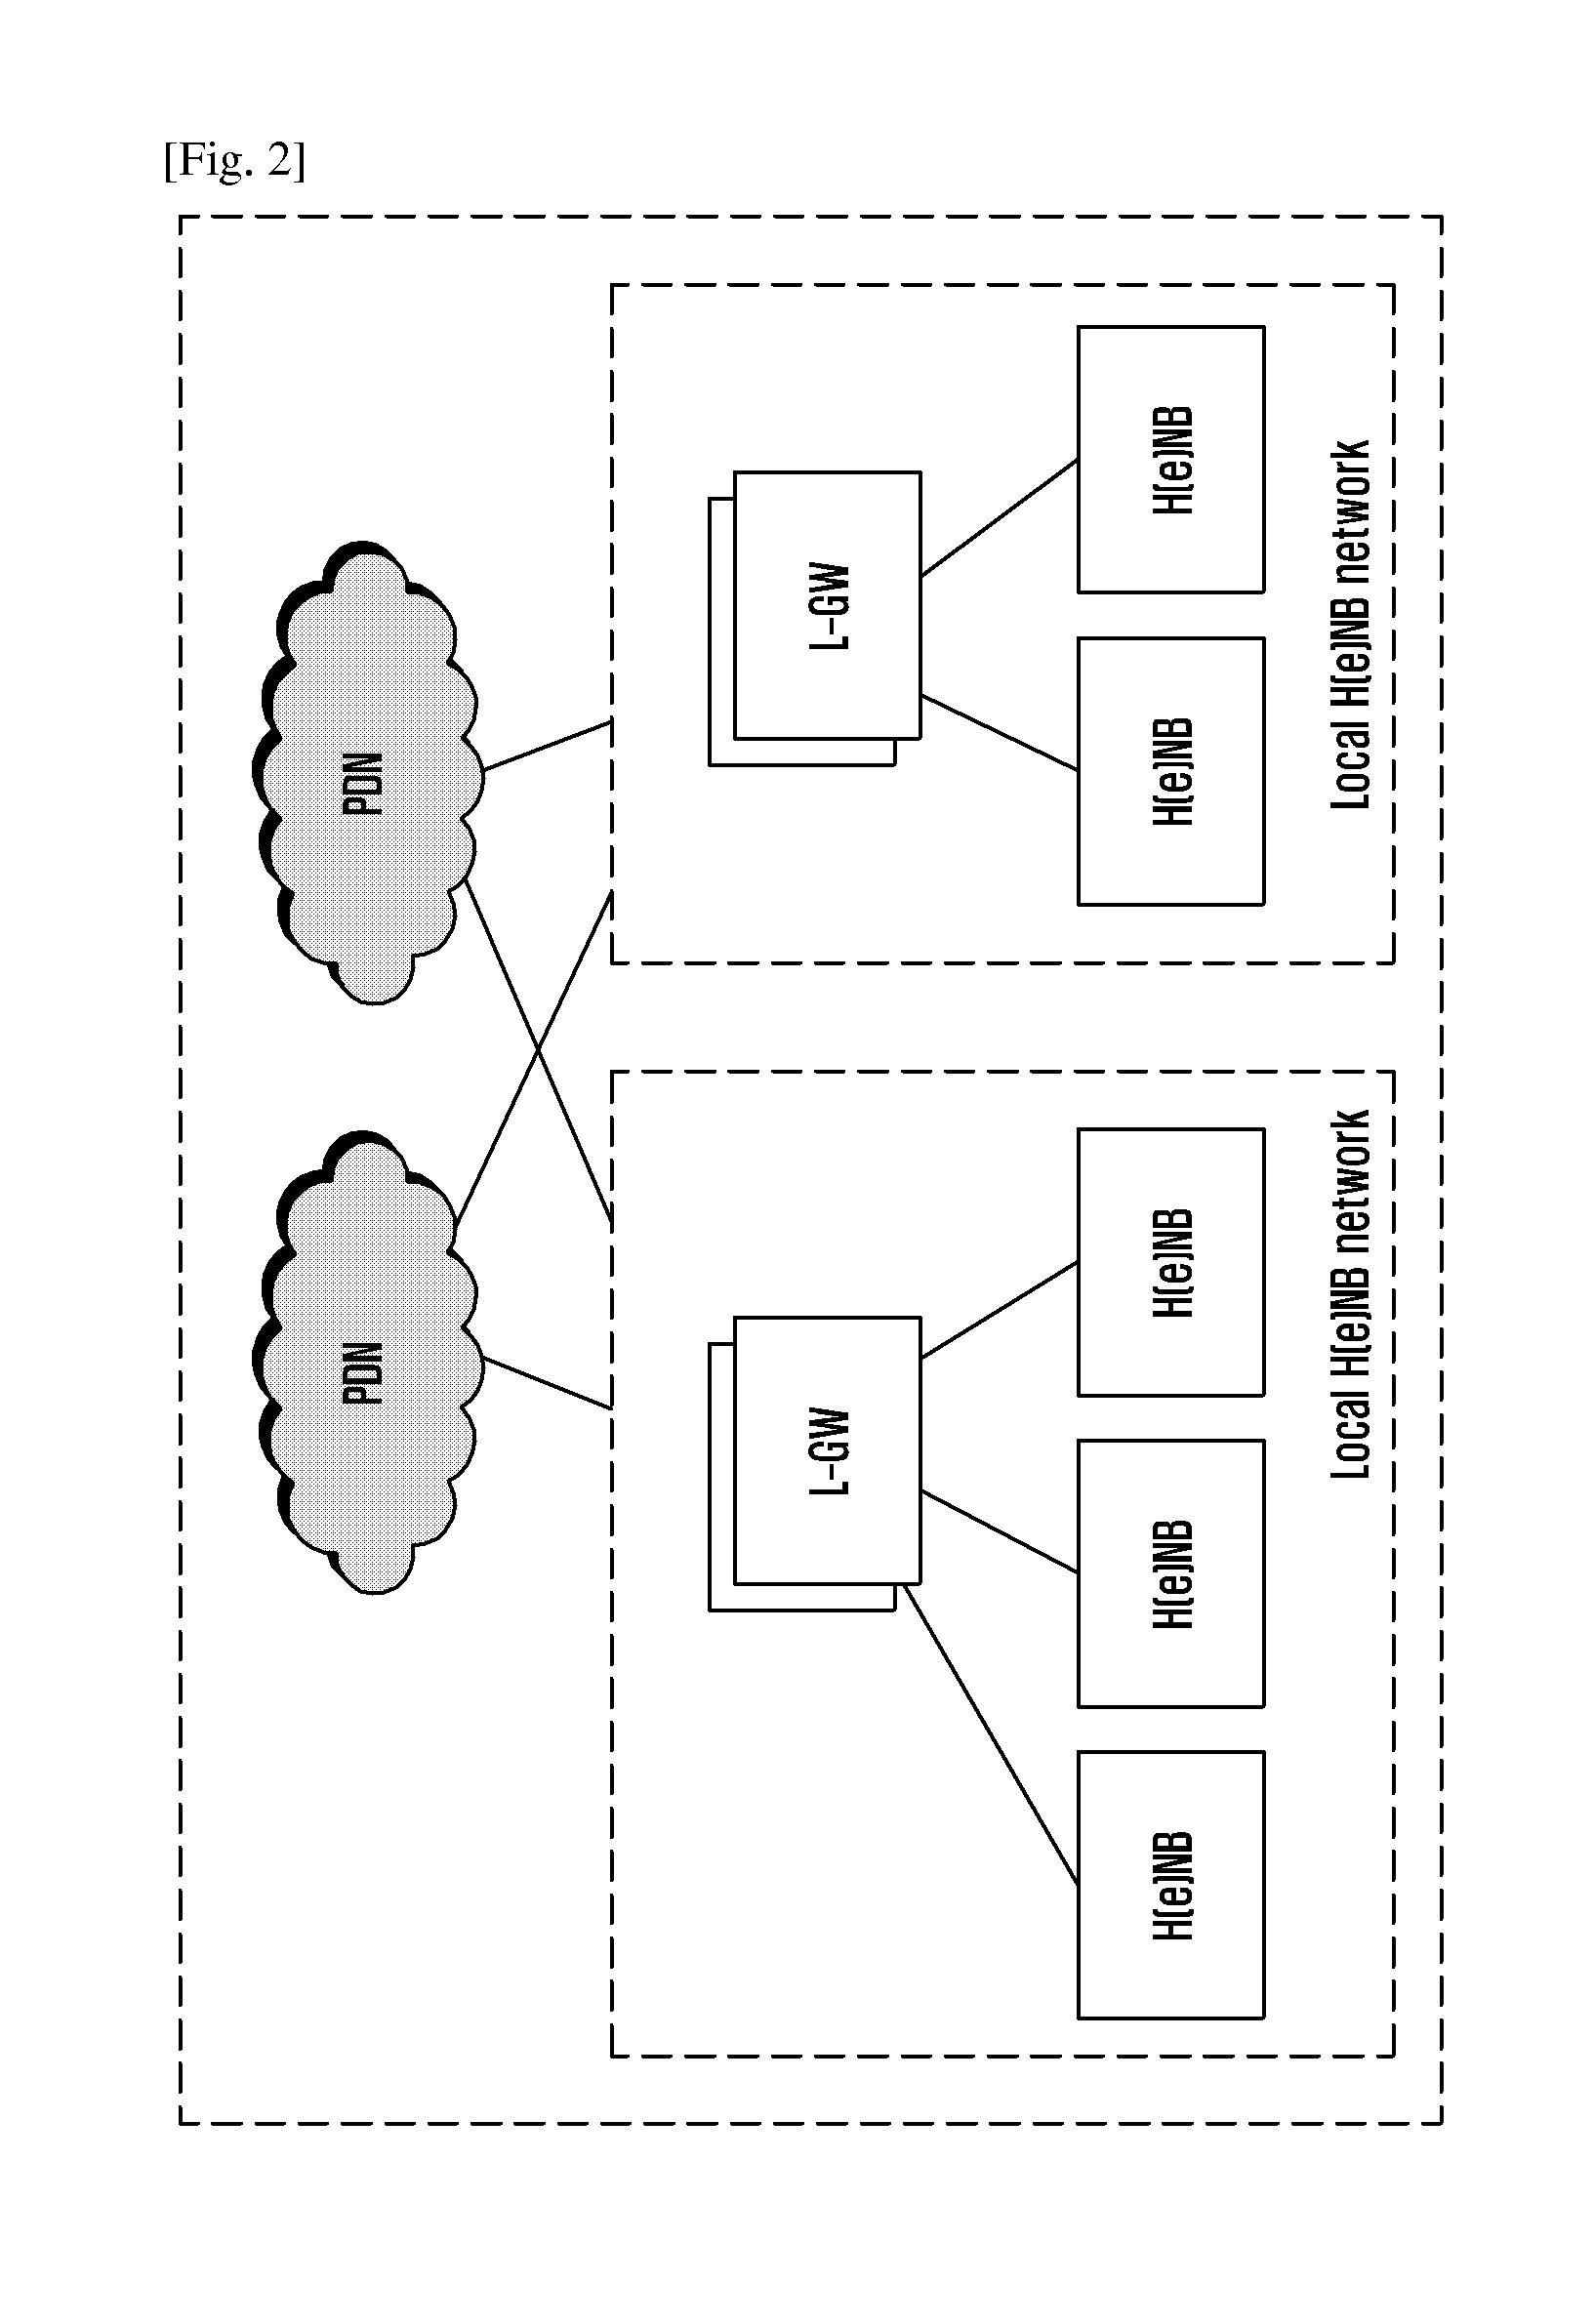 Method for correctly establishing a local IP access service